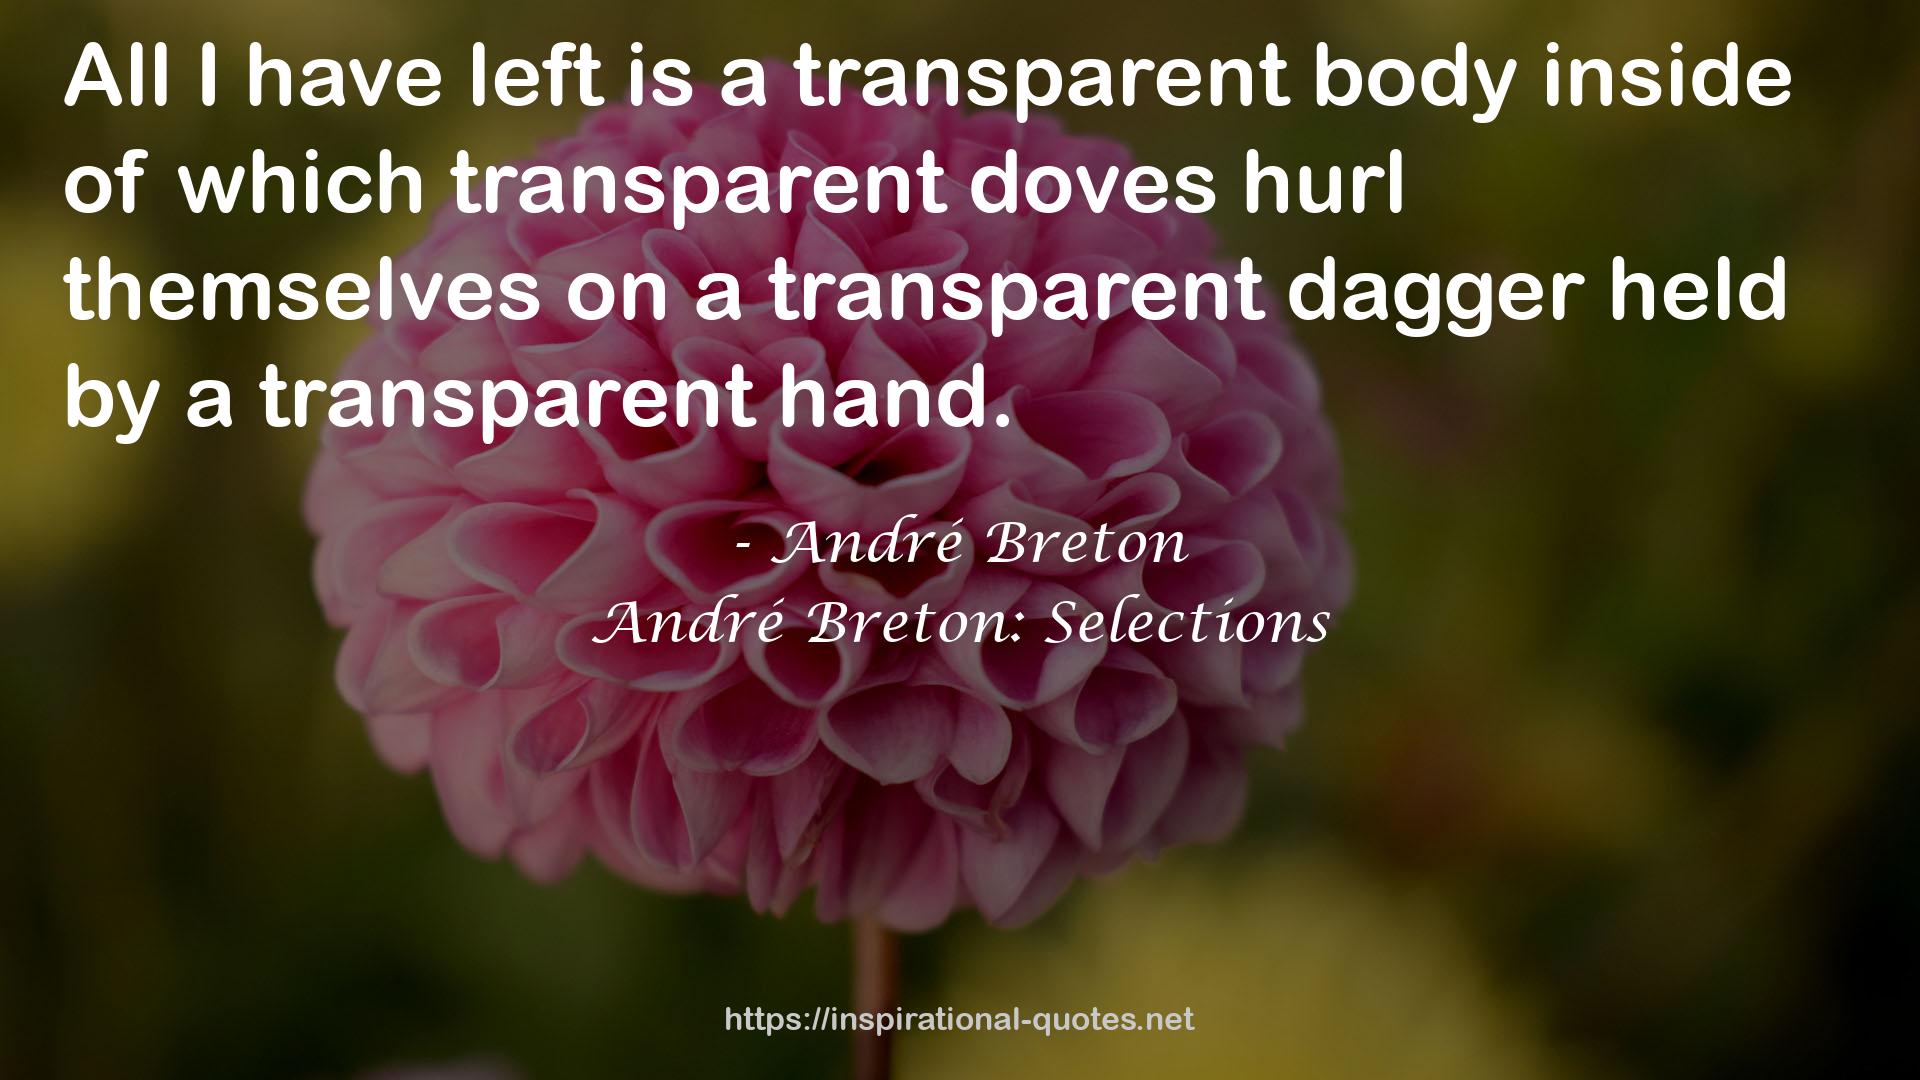 André Breton: Selections QUOTES